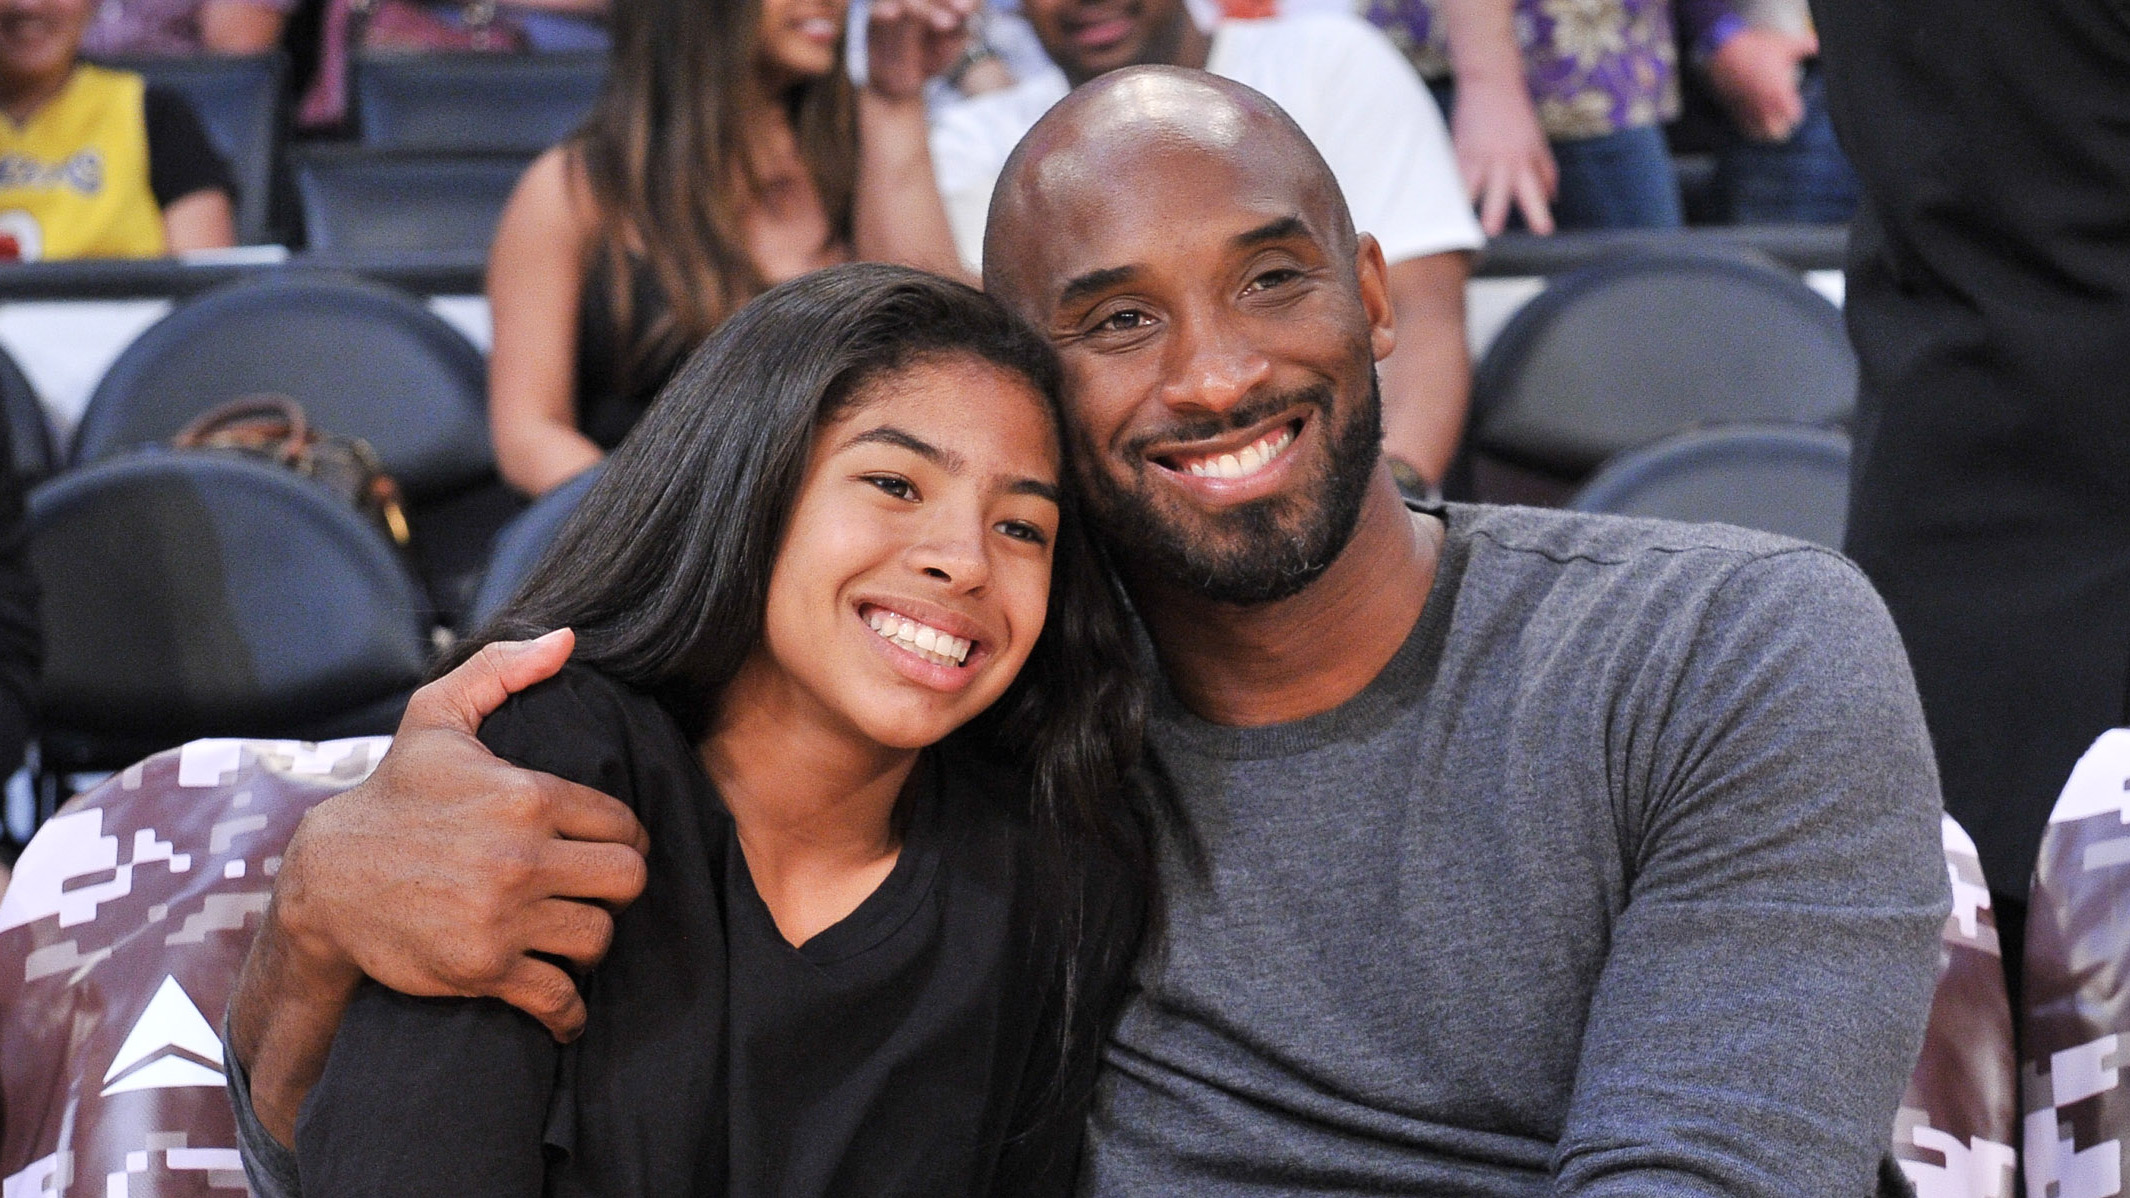 Los Angeles honors Kobe, Gianna Bryant with public memorial - WHYY